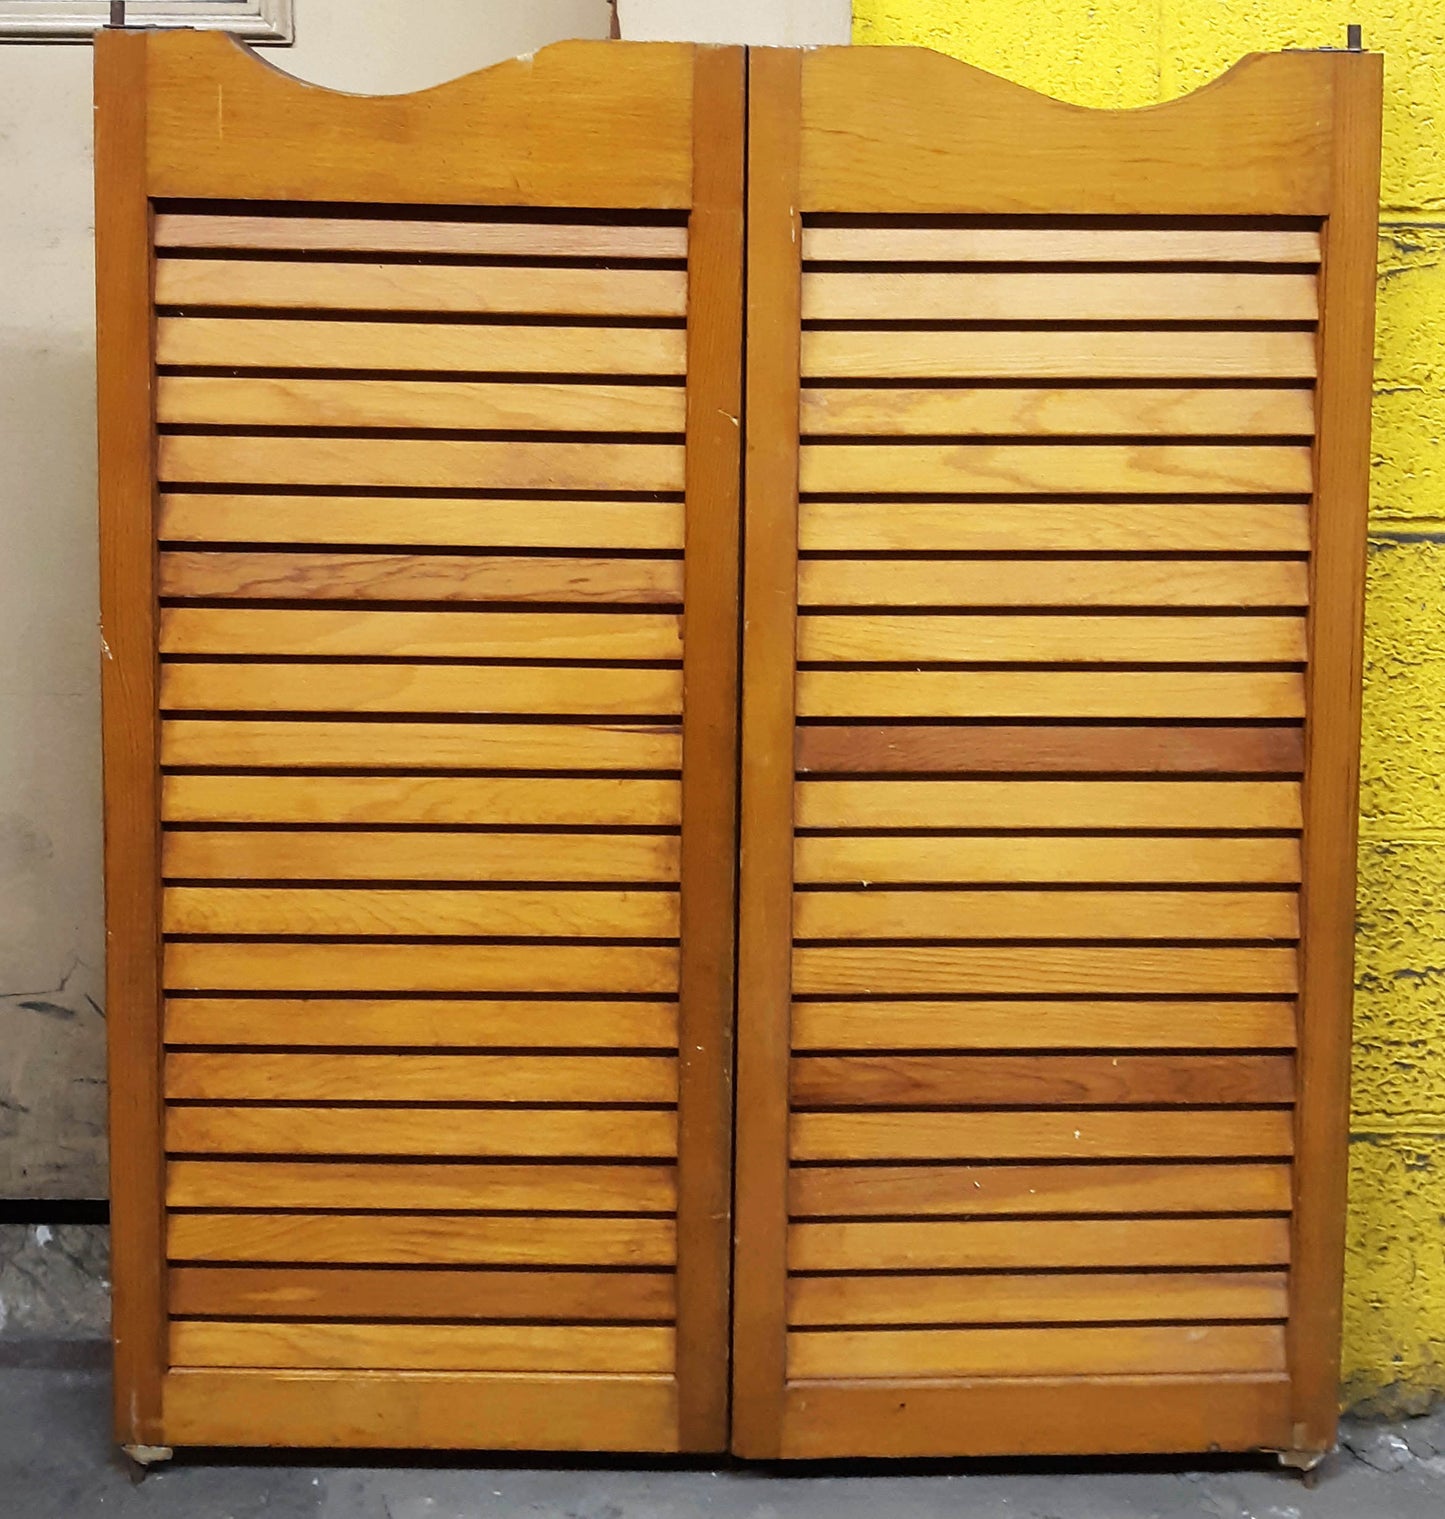 2 available 31"x37"x1" Vintage Antique Salvaged Reclaimed Pair SOLID Wood Wooden Fir Pine Interior Rustic Cabinet Pantry Saloon Style Door Louver Panel